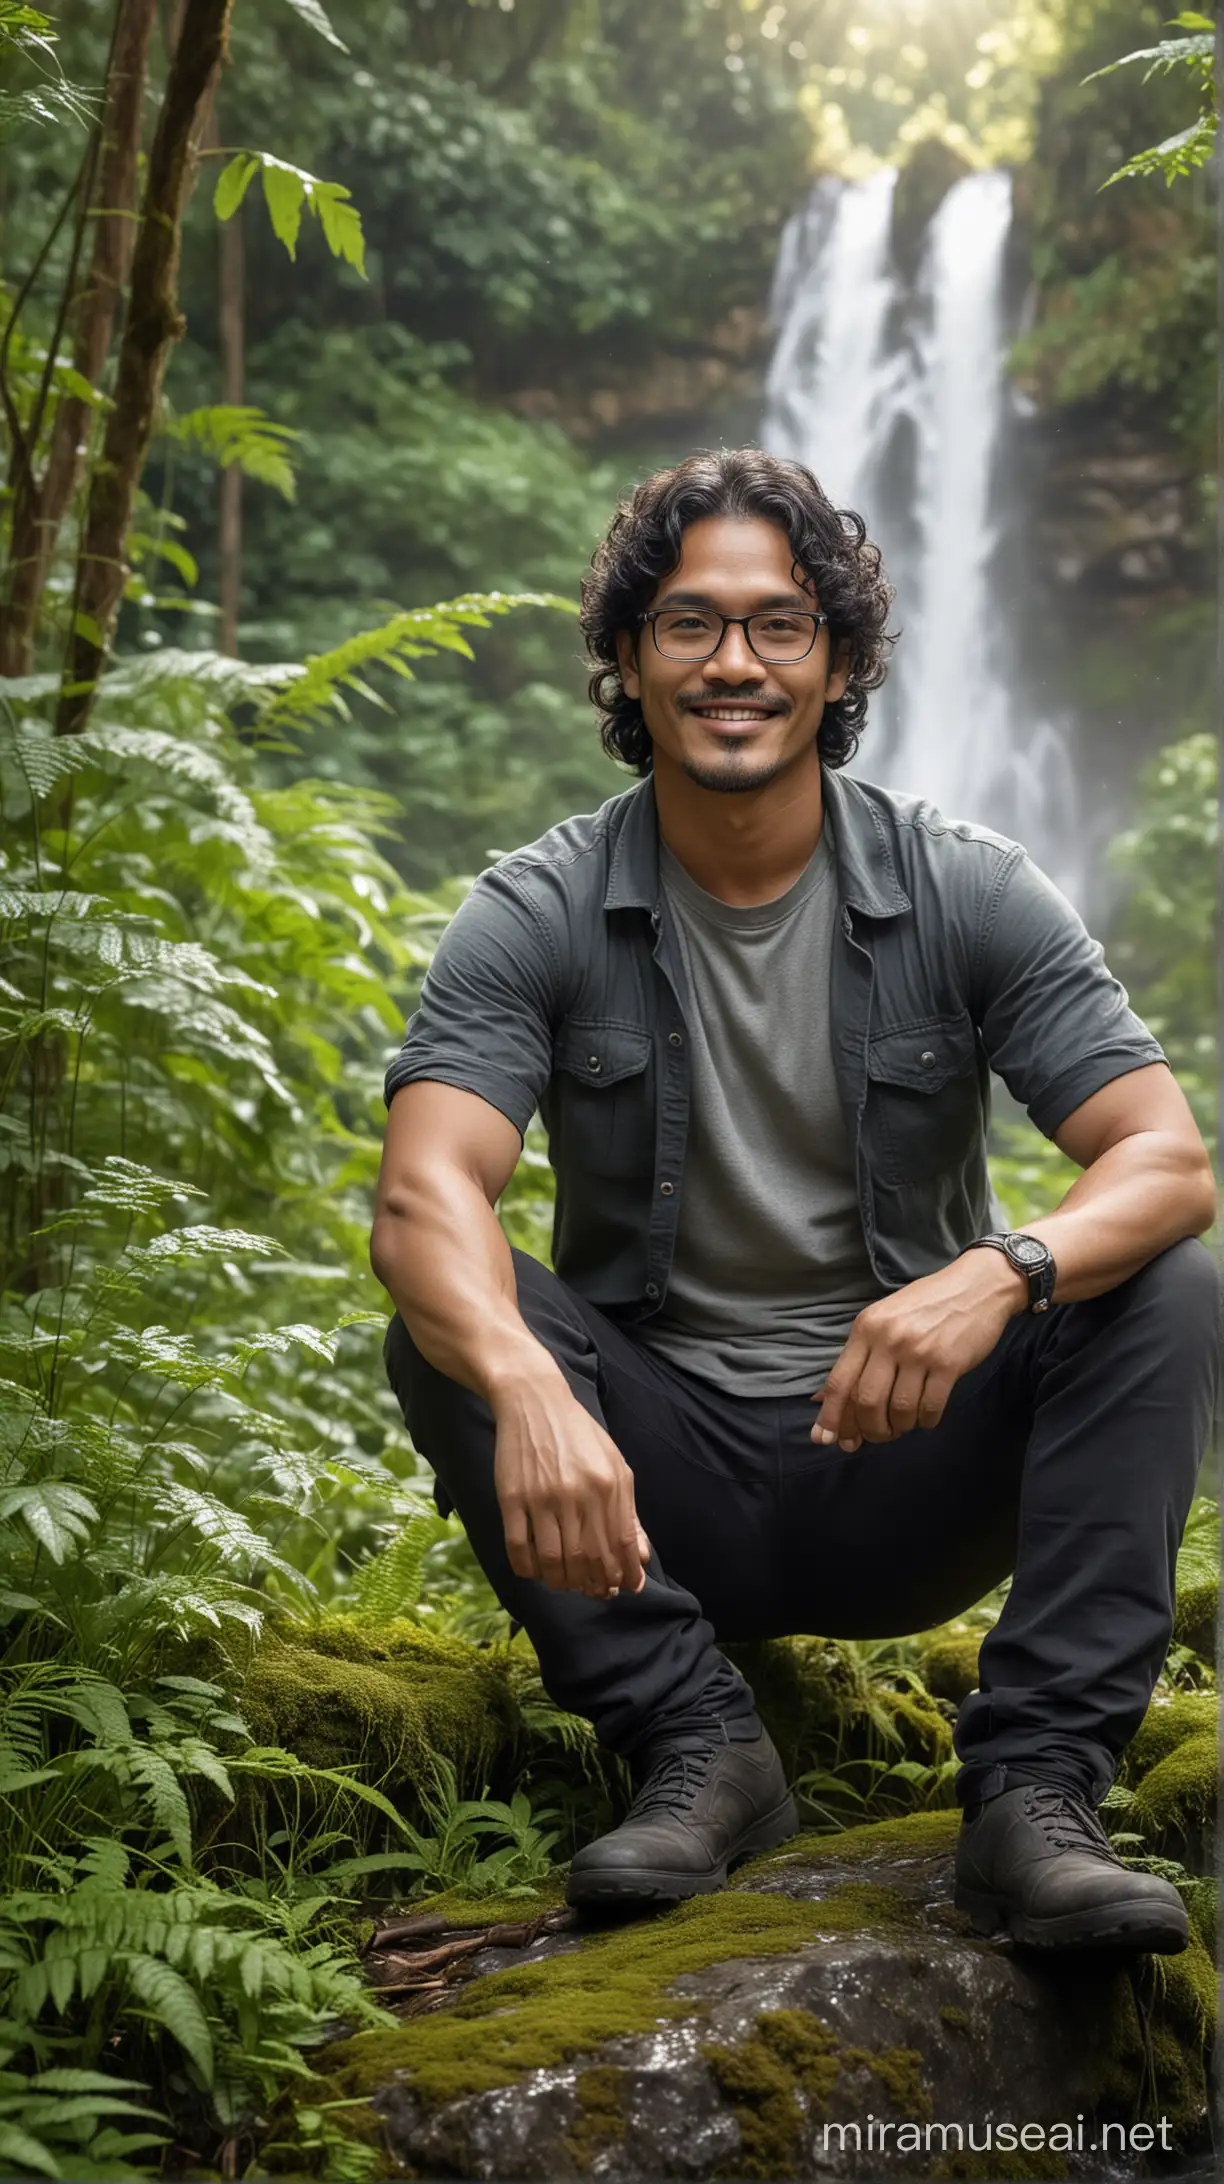 40 year old Indonesian man, handsome, shoulder length curly black hair, wearing square reading glasses, sitting on a rock, facing the front camera while smiling in the middle of a forest filled with sunlight, sunlight penetrating between the leaves. Delicate dewdrops cling to ferns and wildflowers. In the background, a mystical waterfall cascades down moss-covered rocks, and mist rises into the air. High resolution, high realism.